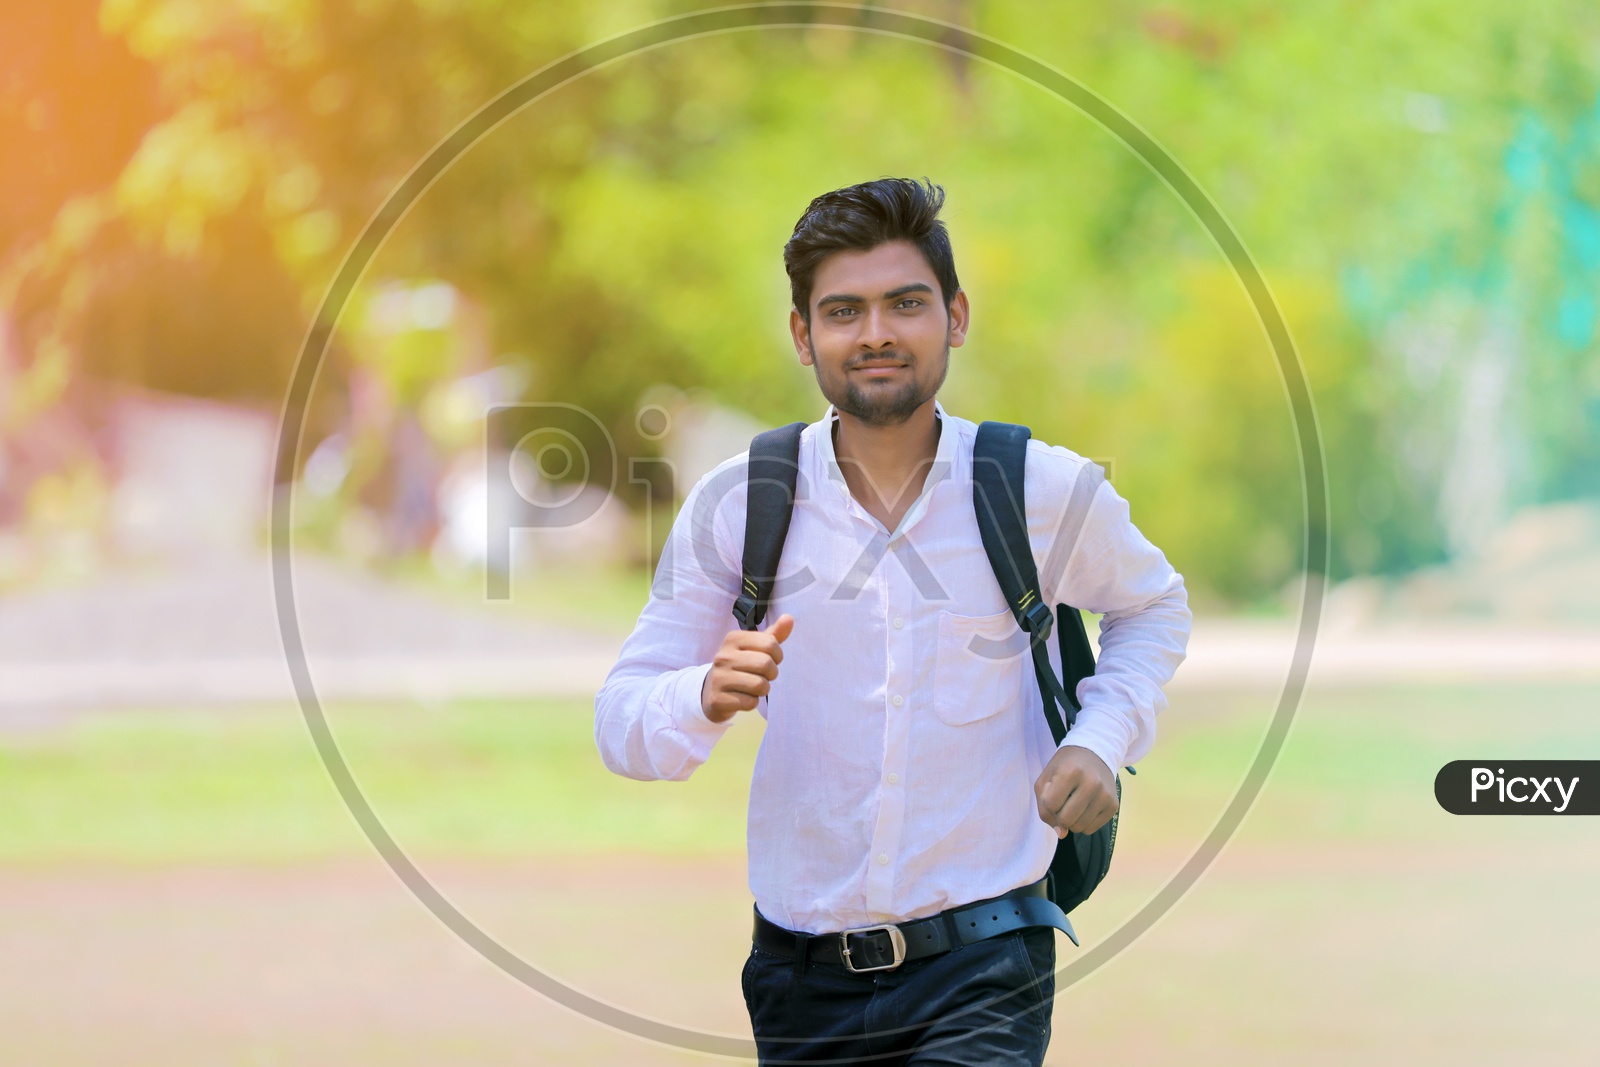 A Young Indian Man wearing  Bag Running and Looking Confident